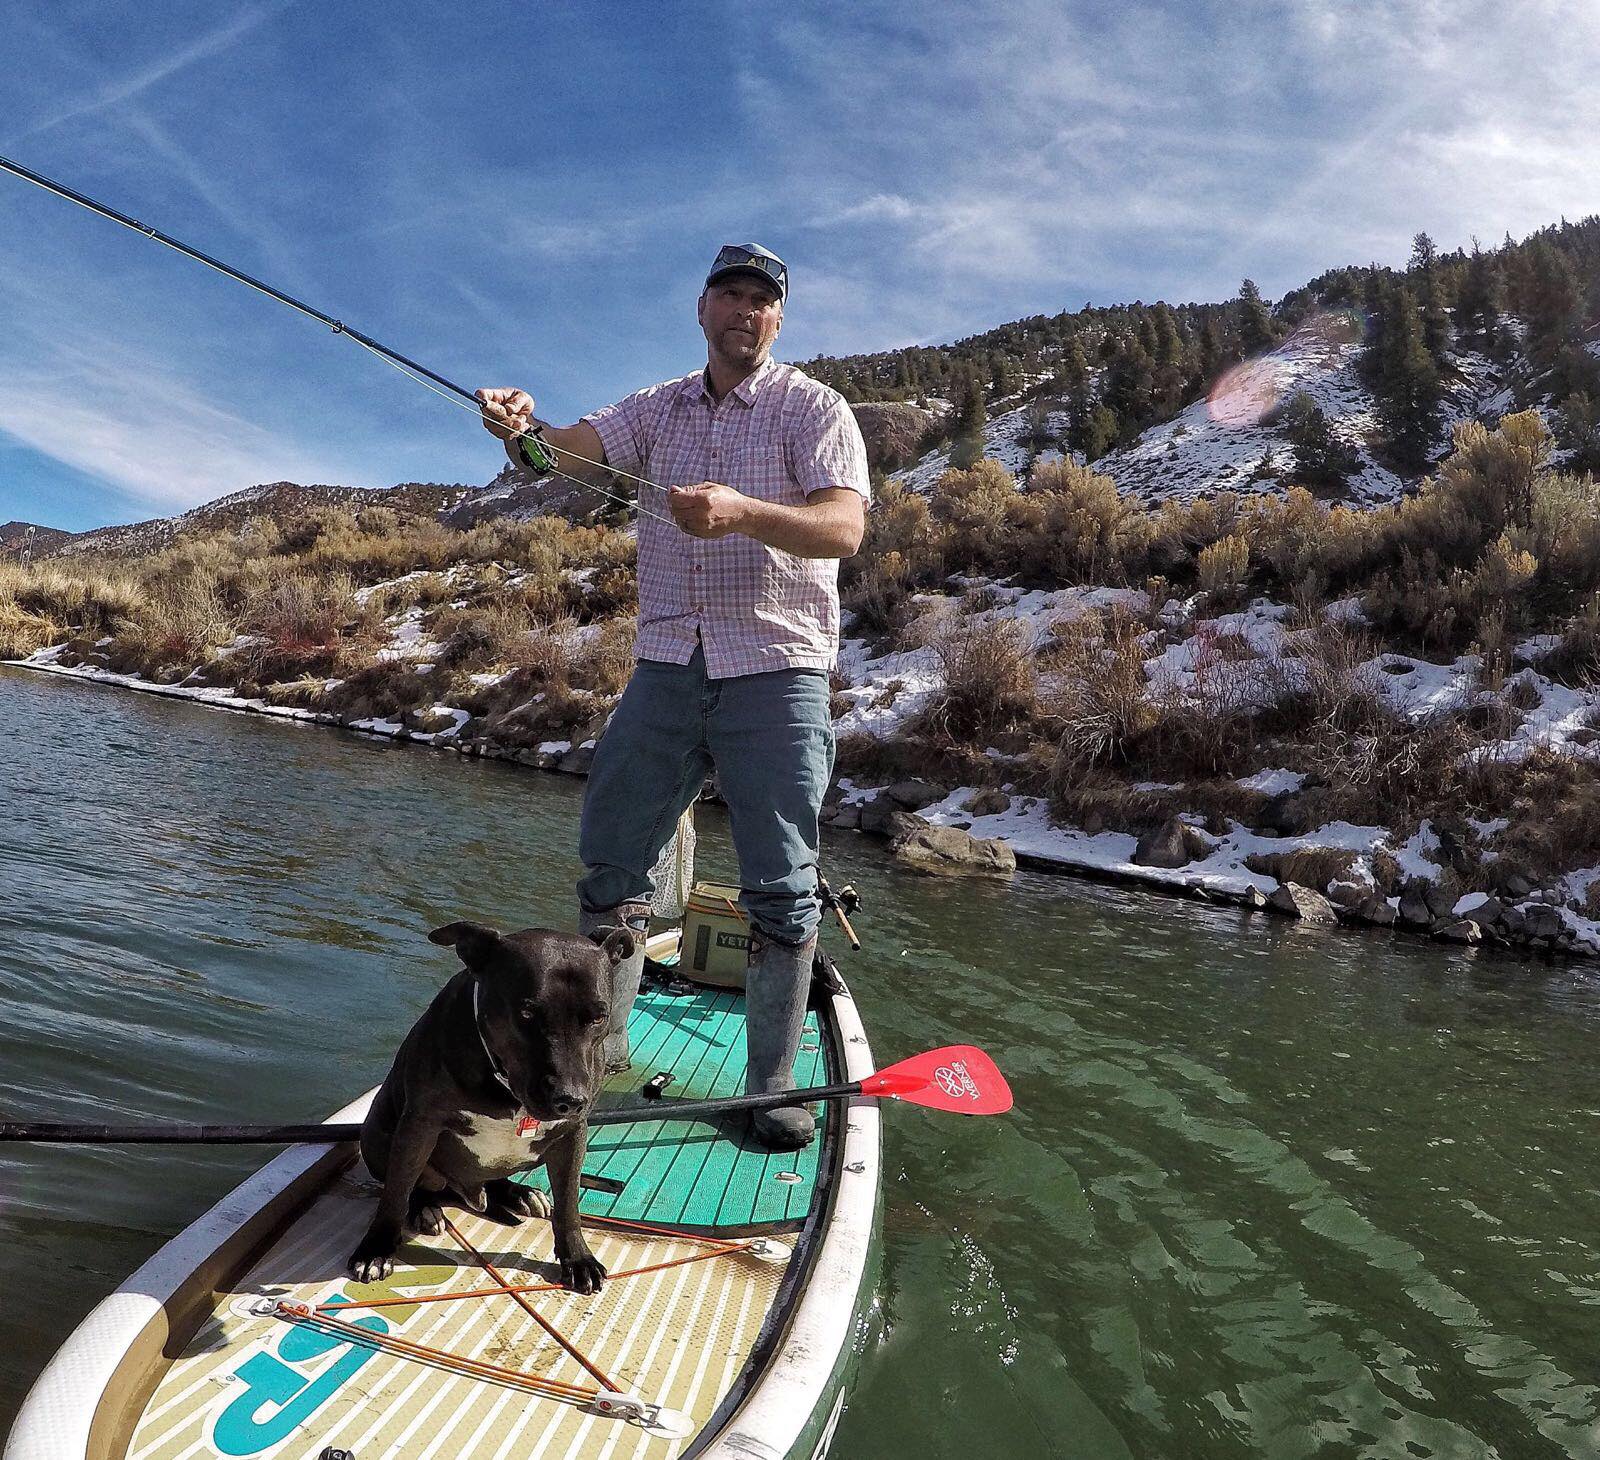 Man and his dog on a fishing SUP with all his gear